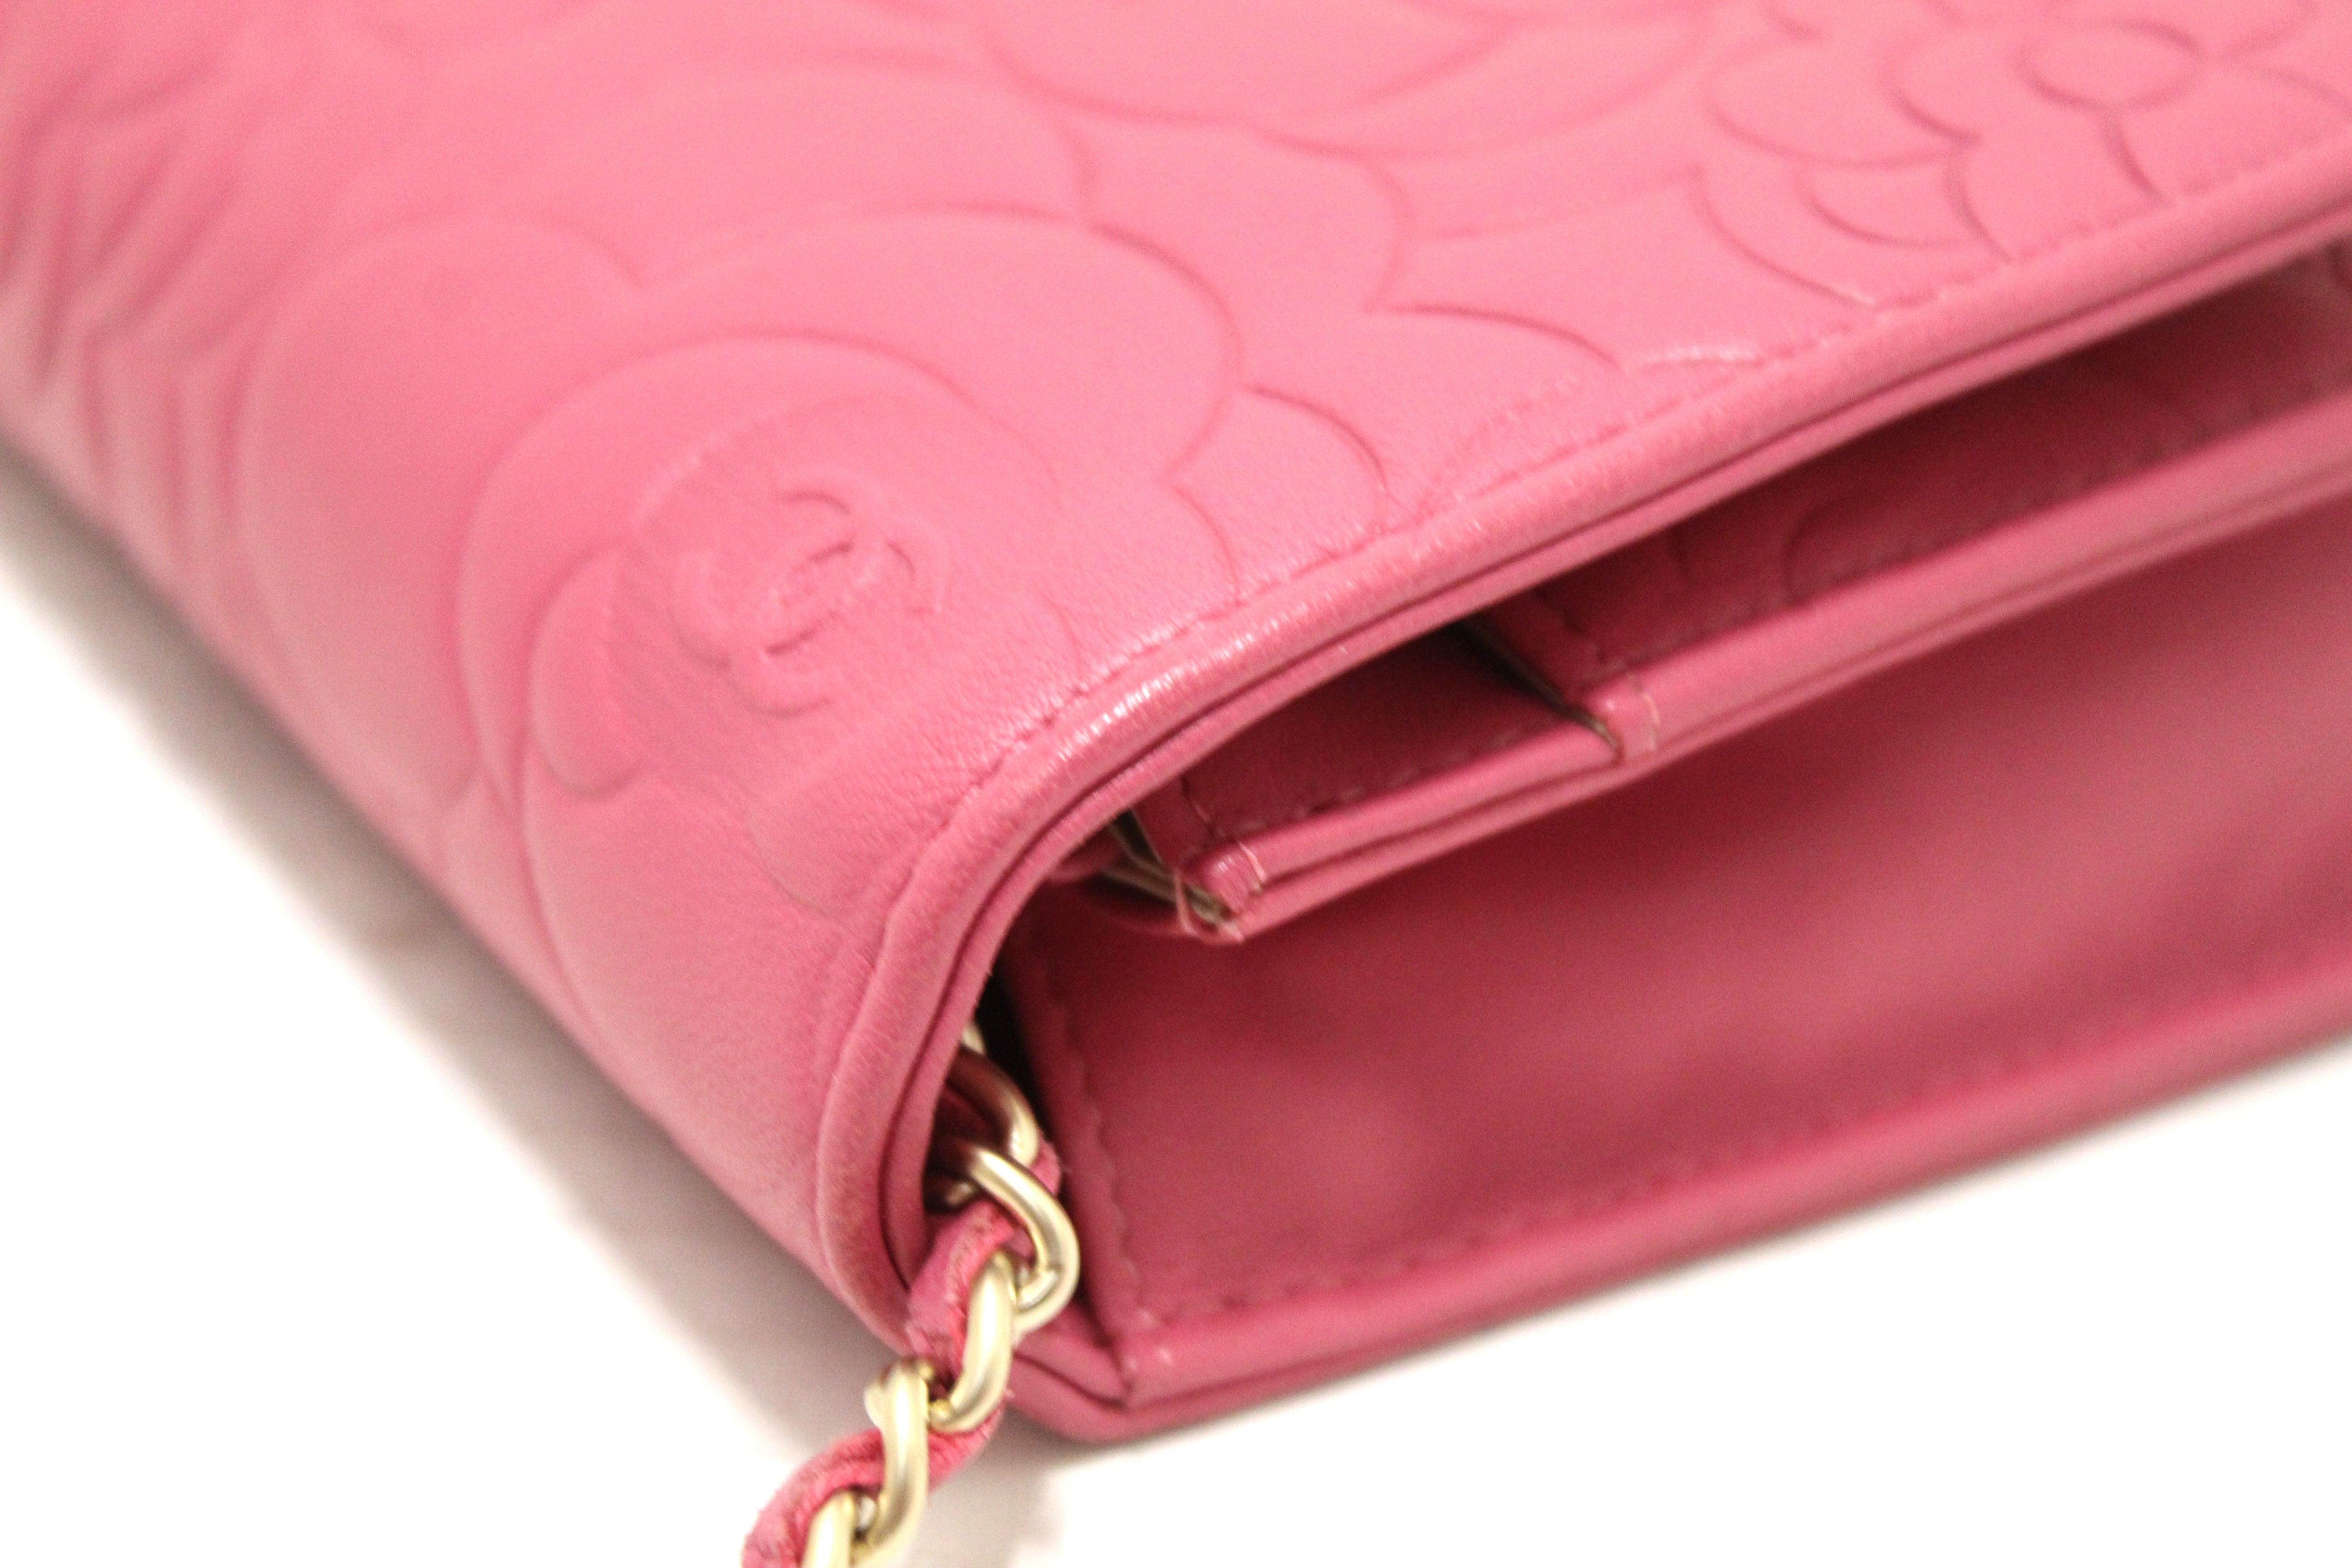 Chanel CC Zip Coin Purse Camellia Lambskin Small Pink 1551781